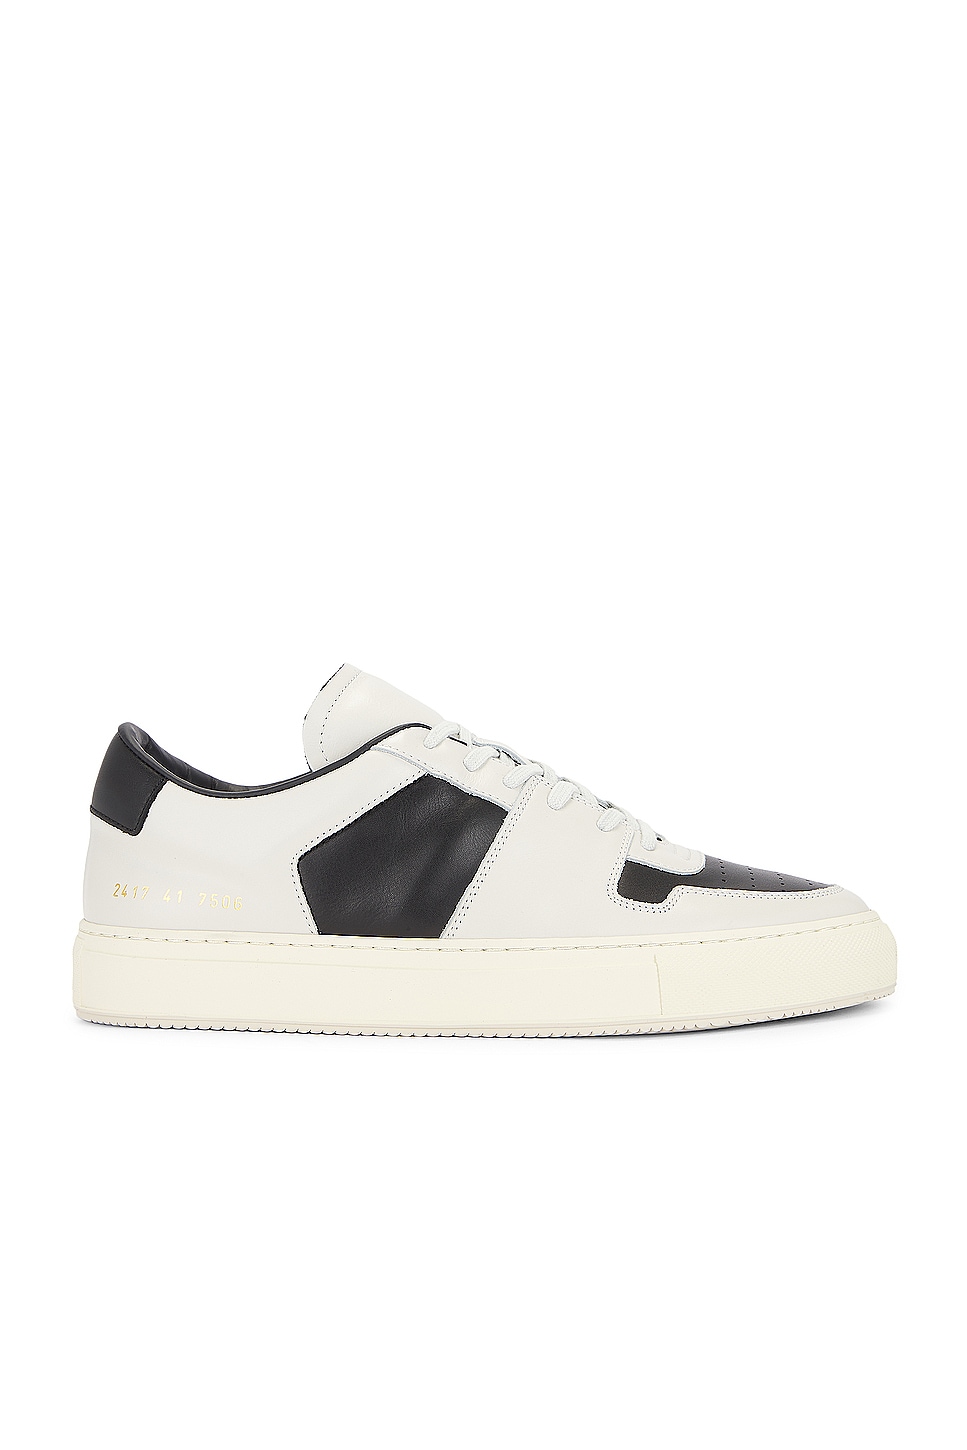 Image 1 of Common Projects Decades Sneaker in Black & White